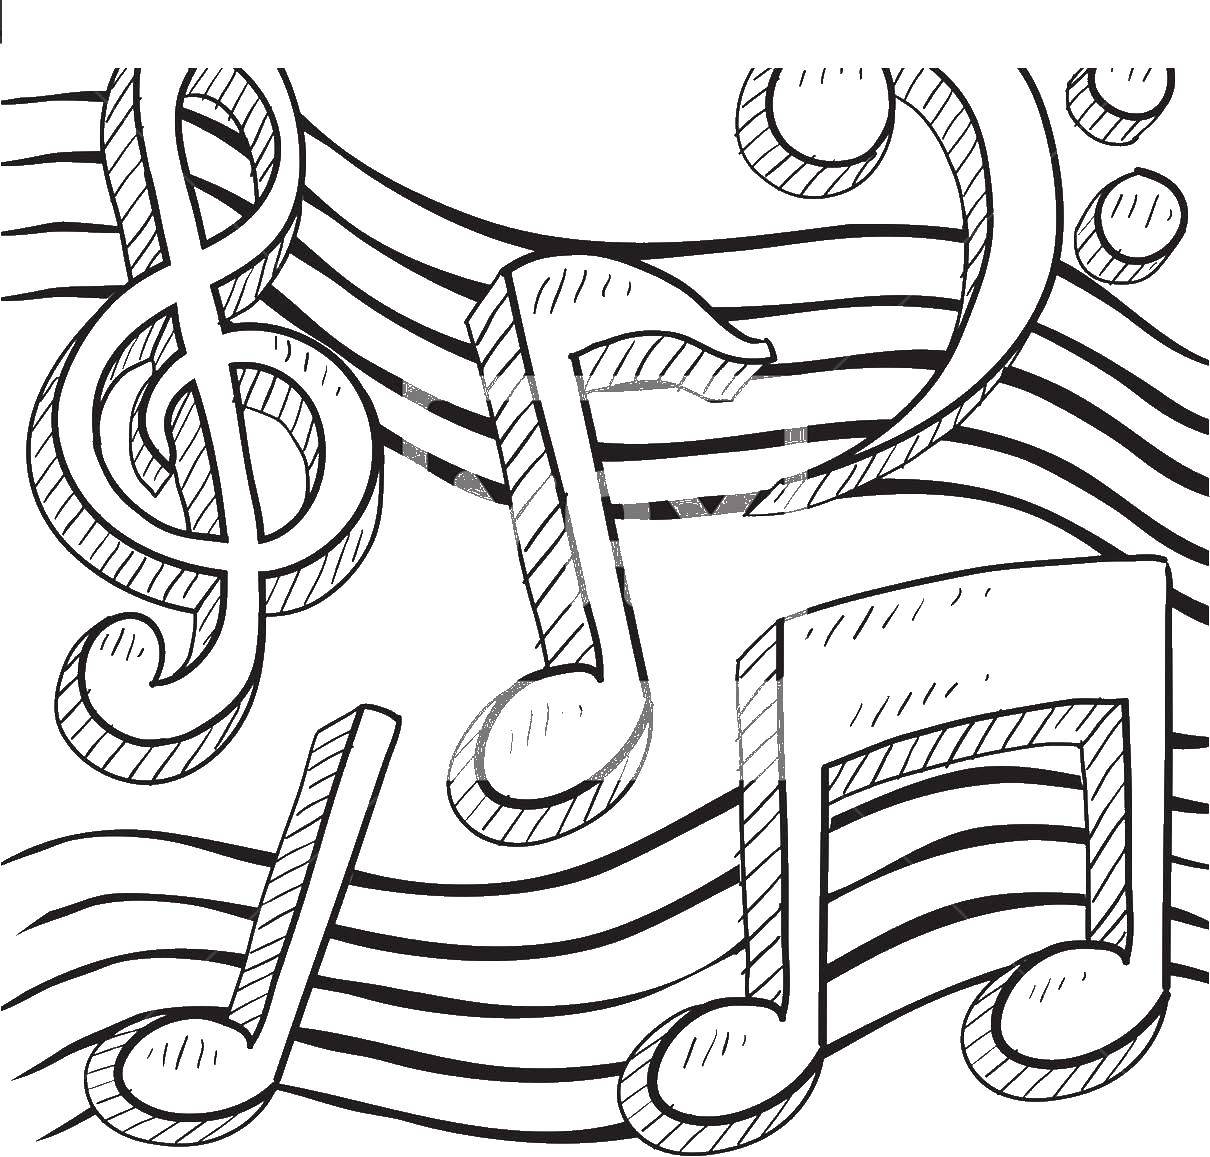 Coloring Musical lines. Category Music. Tags:  Music, instrument, musician, note.